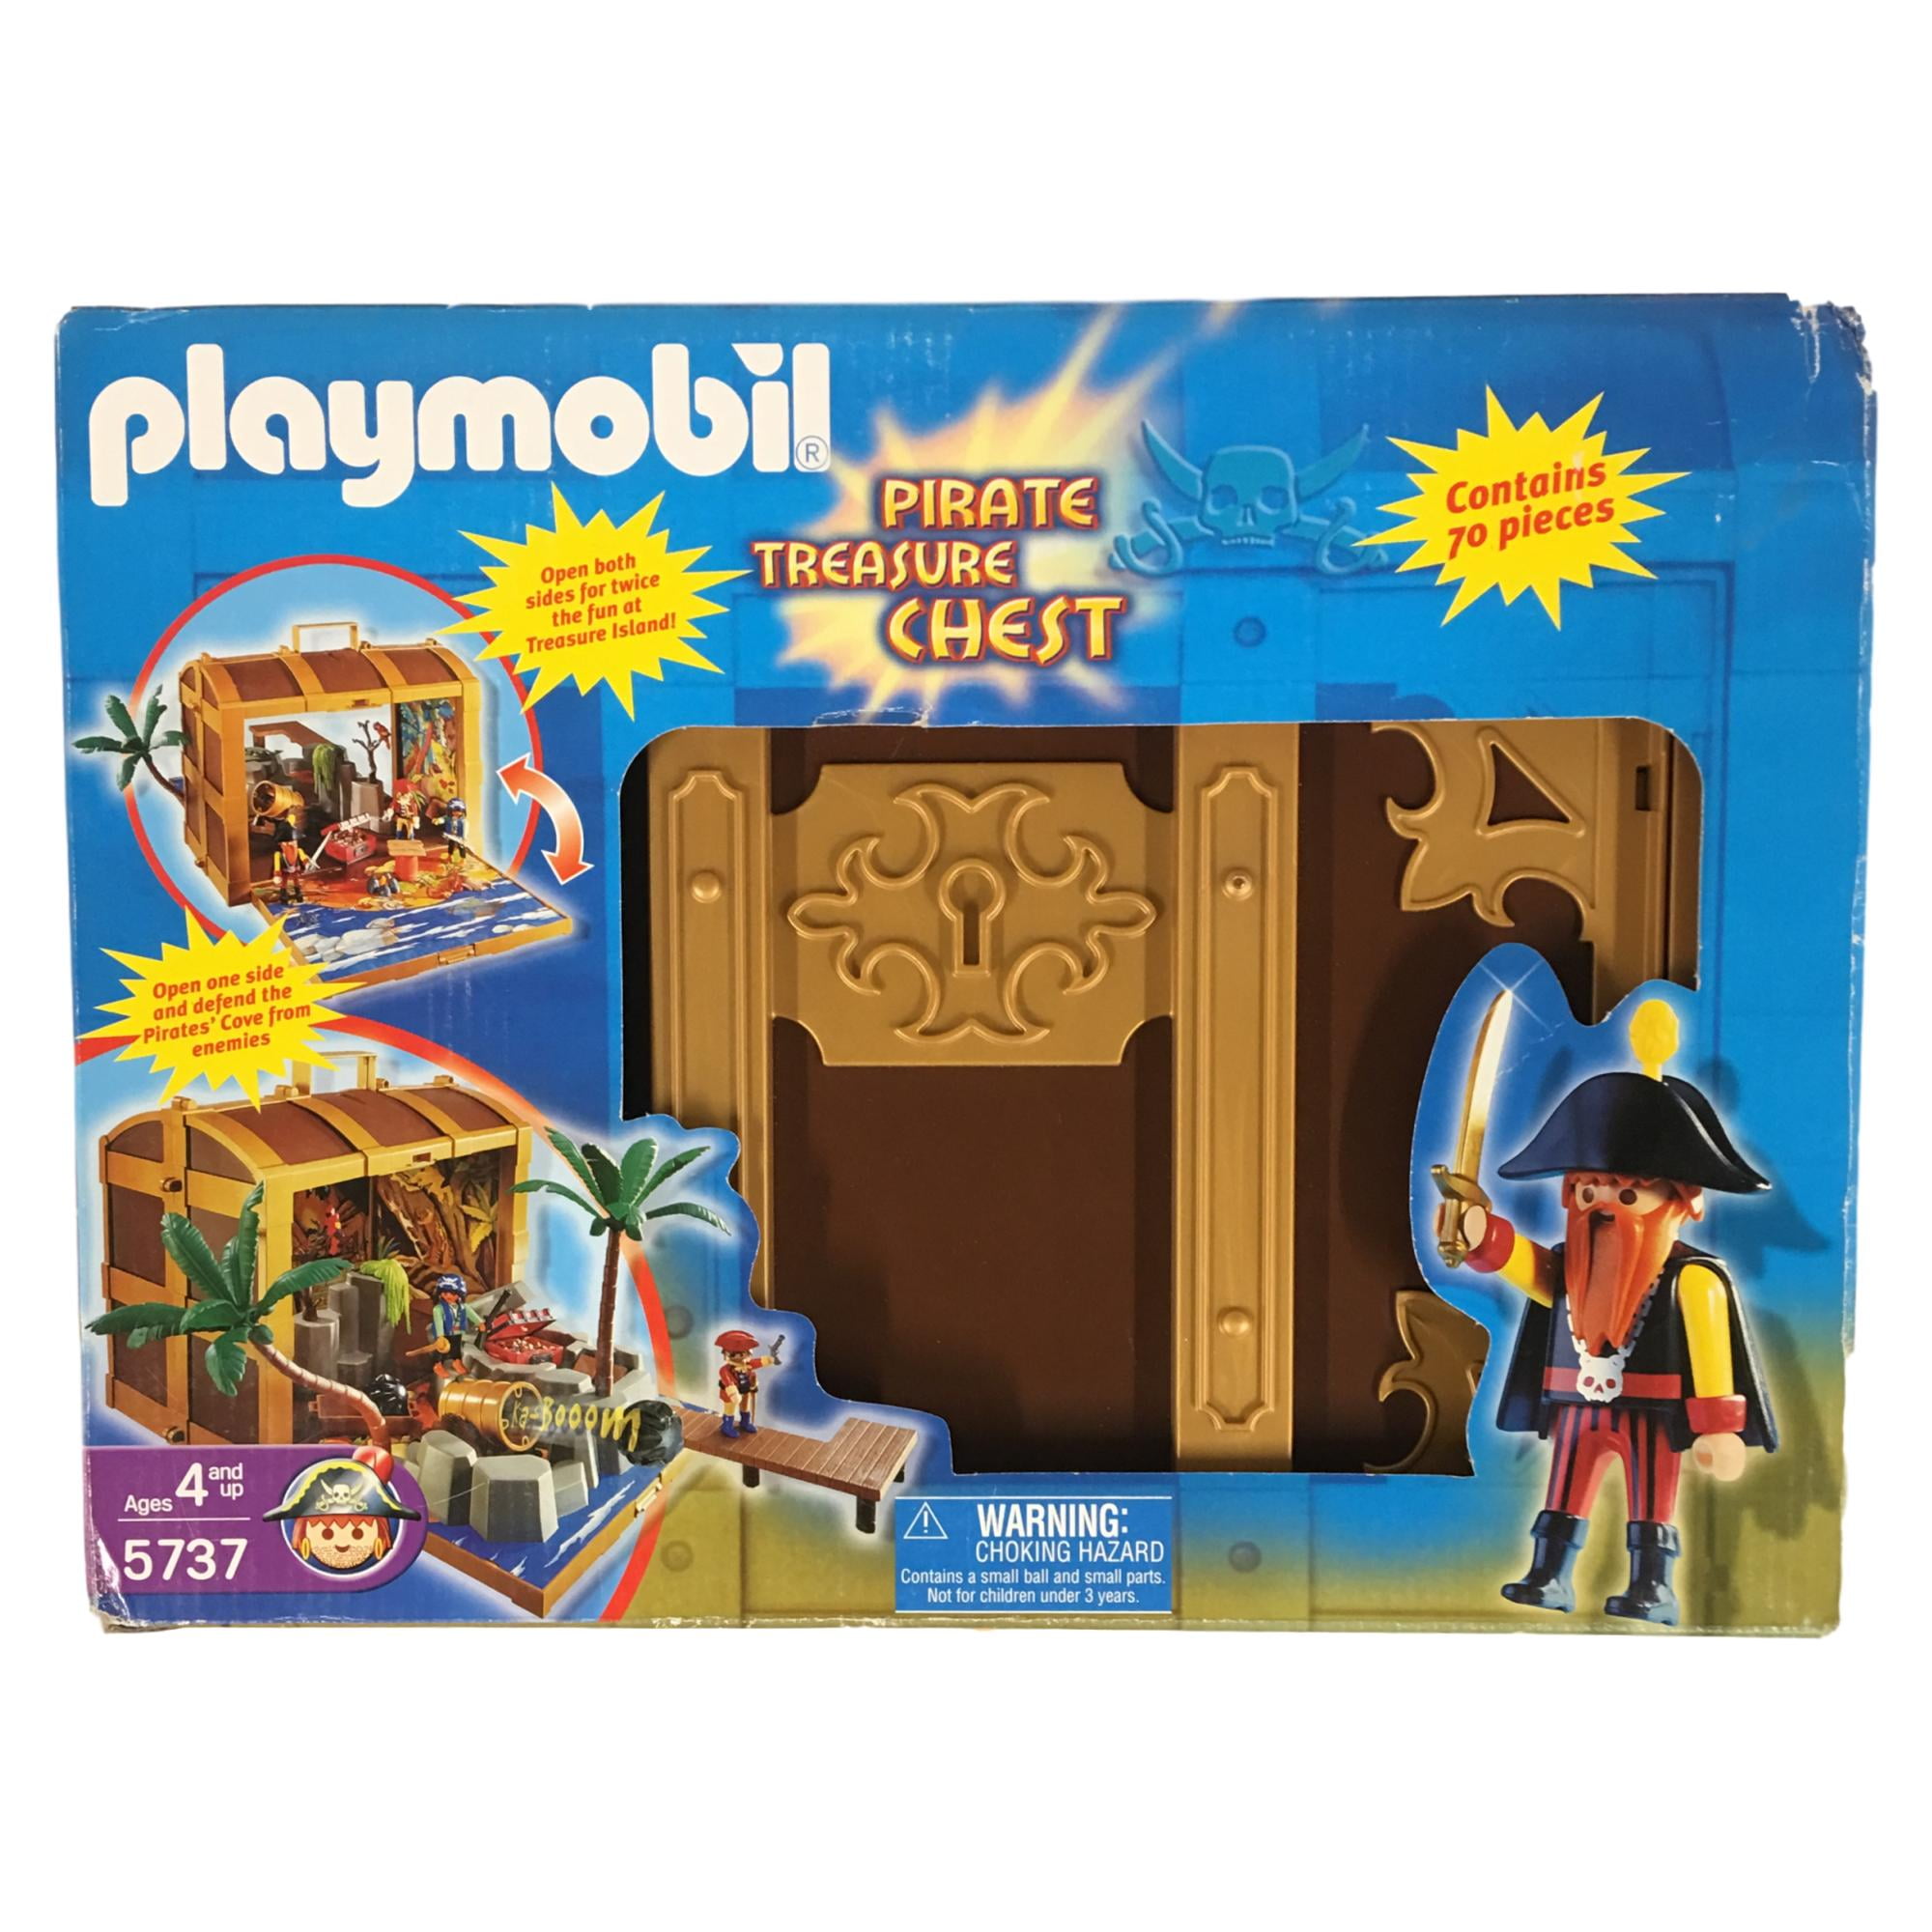 coins & gems NEW Treasure chest golden bars Playmobil Castle/Palace/Pirate 